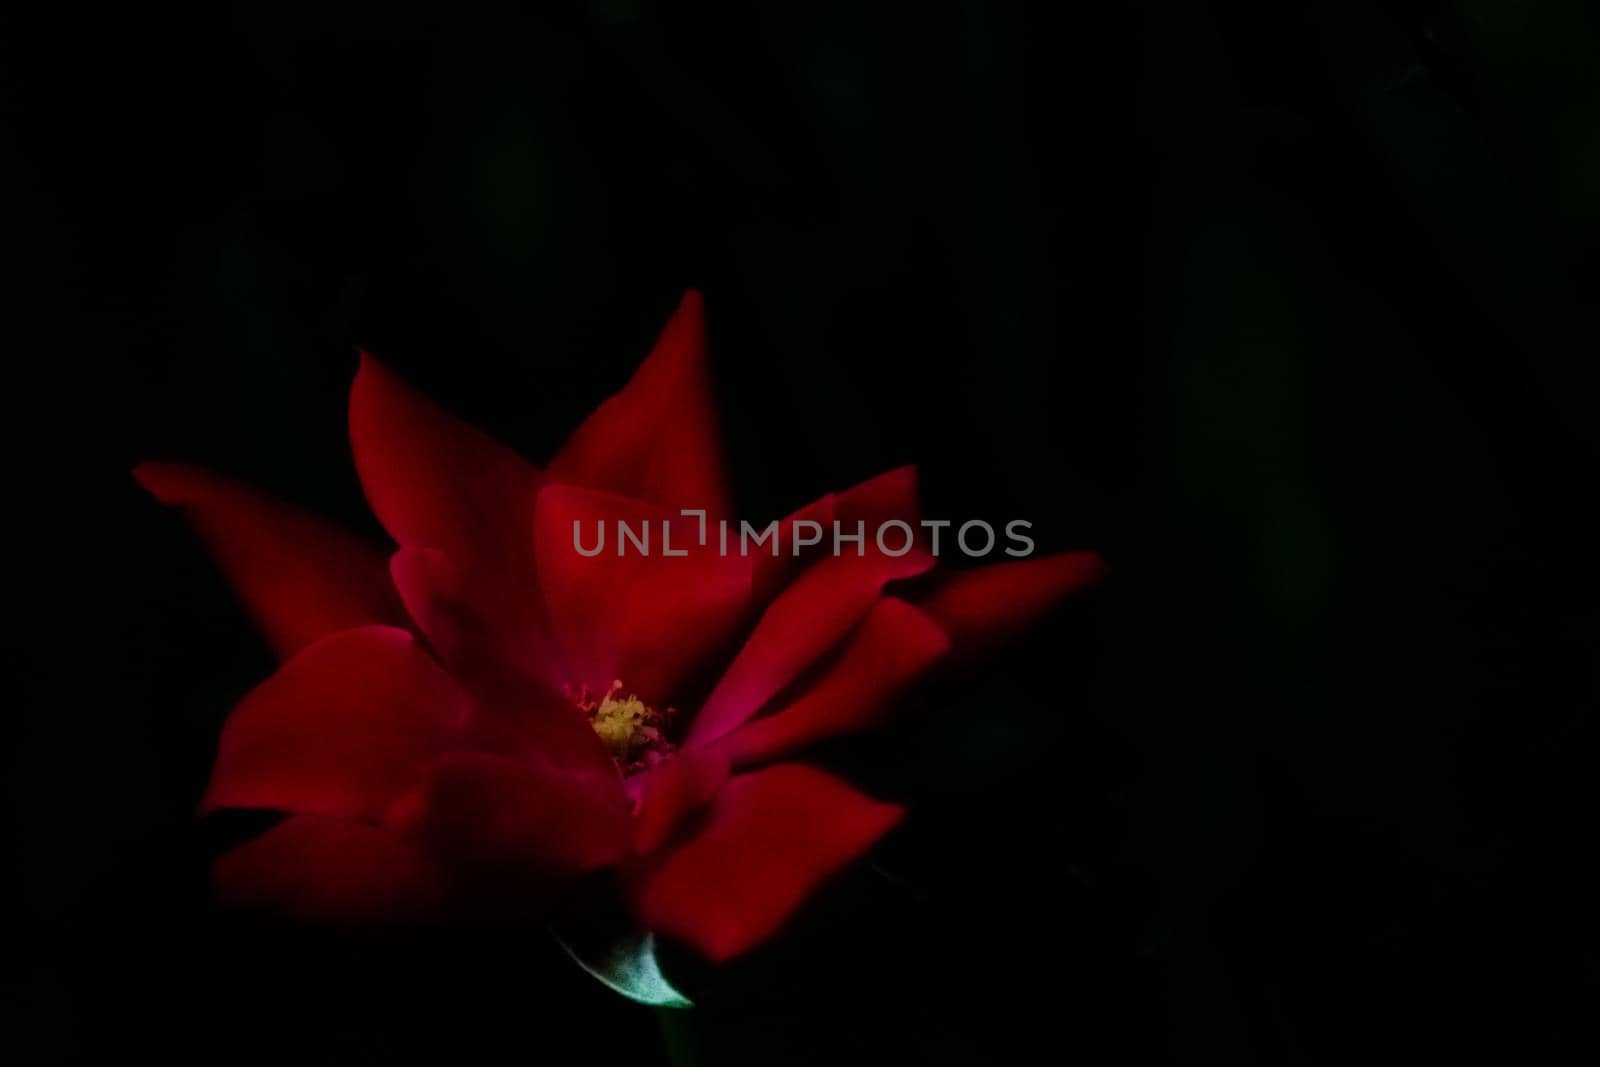 A Bright Red Rose on a Dark Background by bju12290